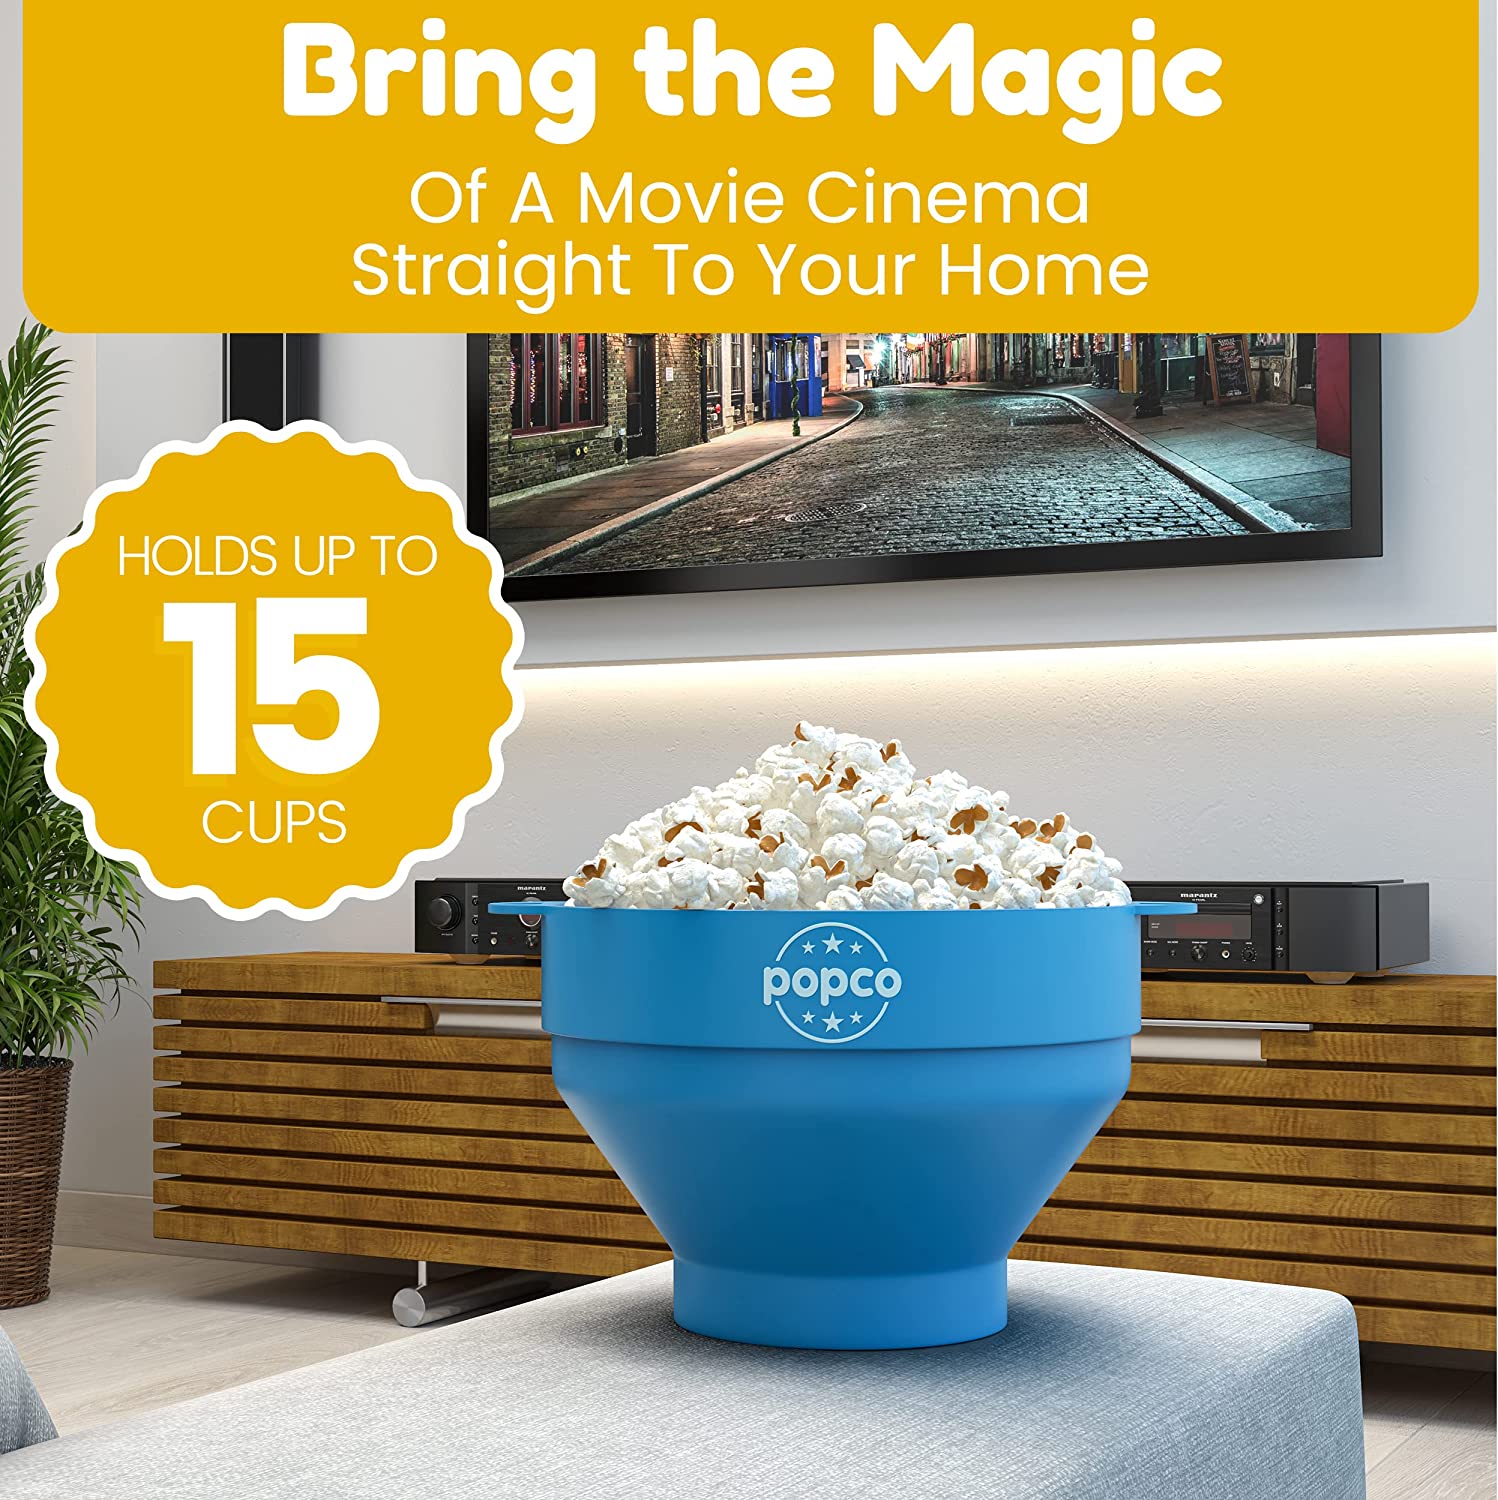 A microwave popcorn maker filled with fresh popcorn. The popcorn maker is sitting on an ottoman in front of a TV. There is text which says, 'Bring the magic of a movie cinema straight to your home.'